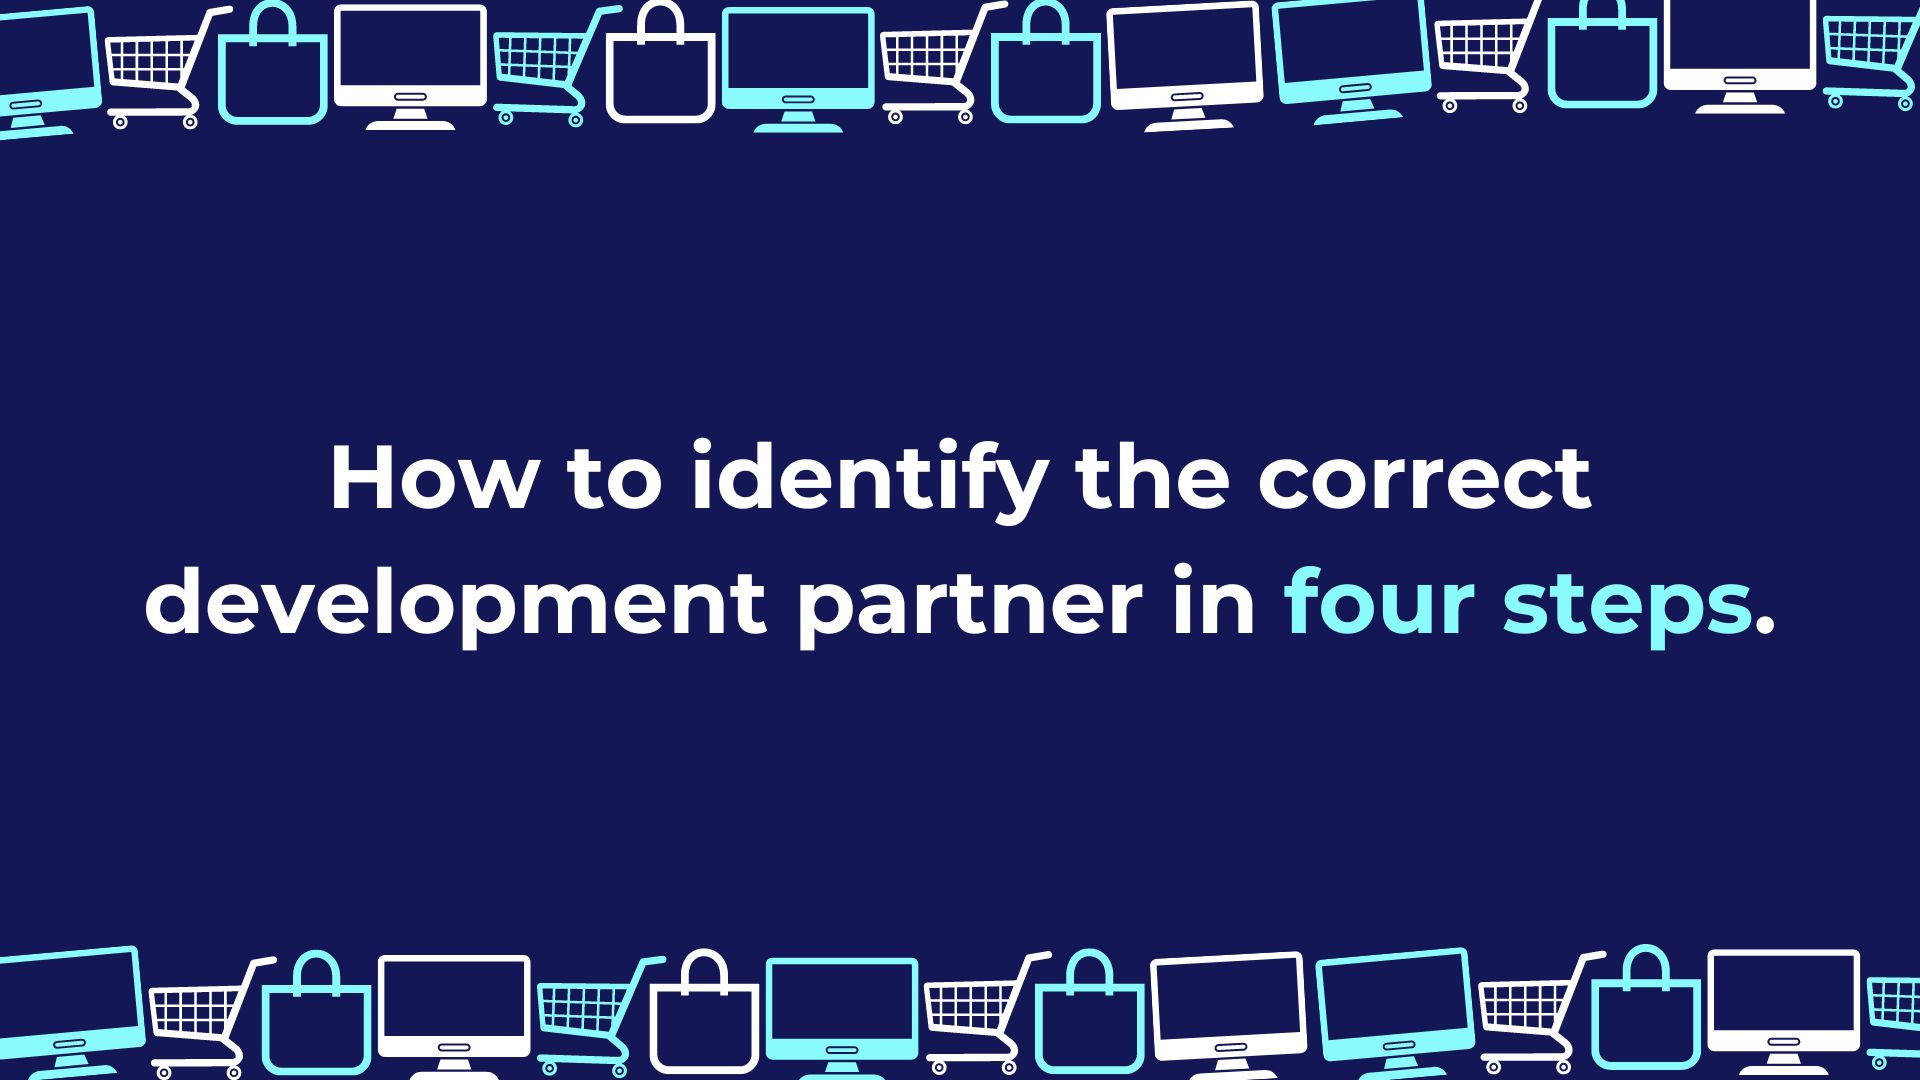 How to identify the correct development partner in four steps